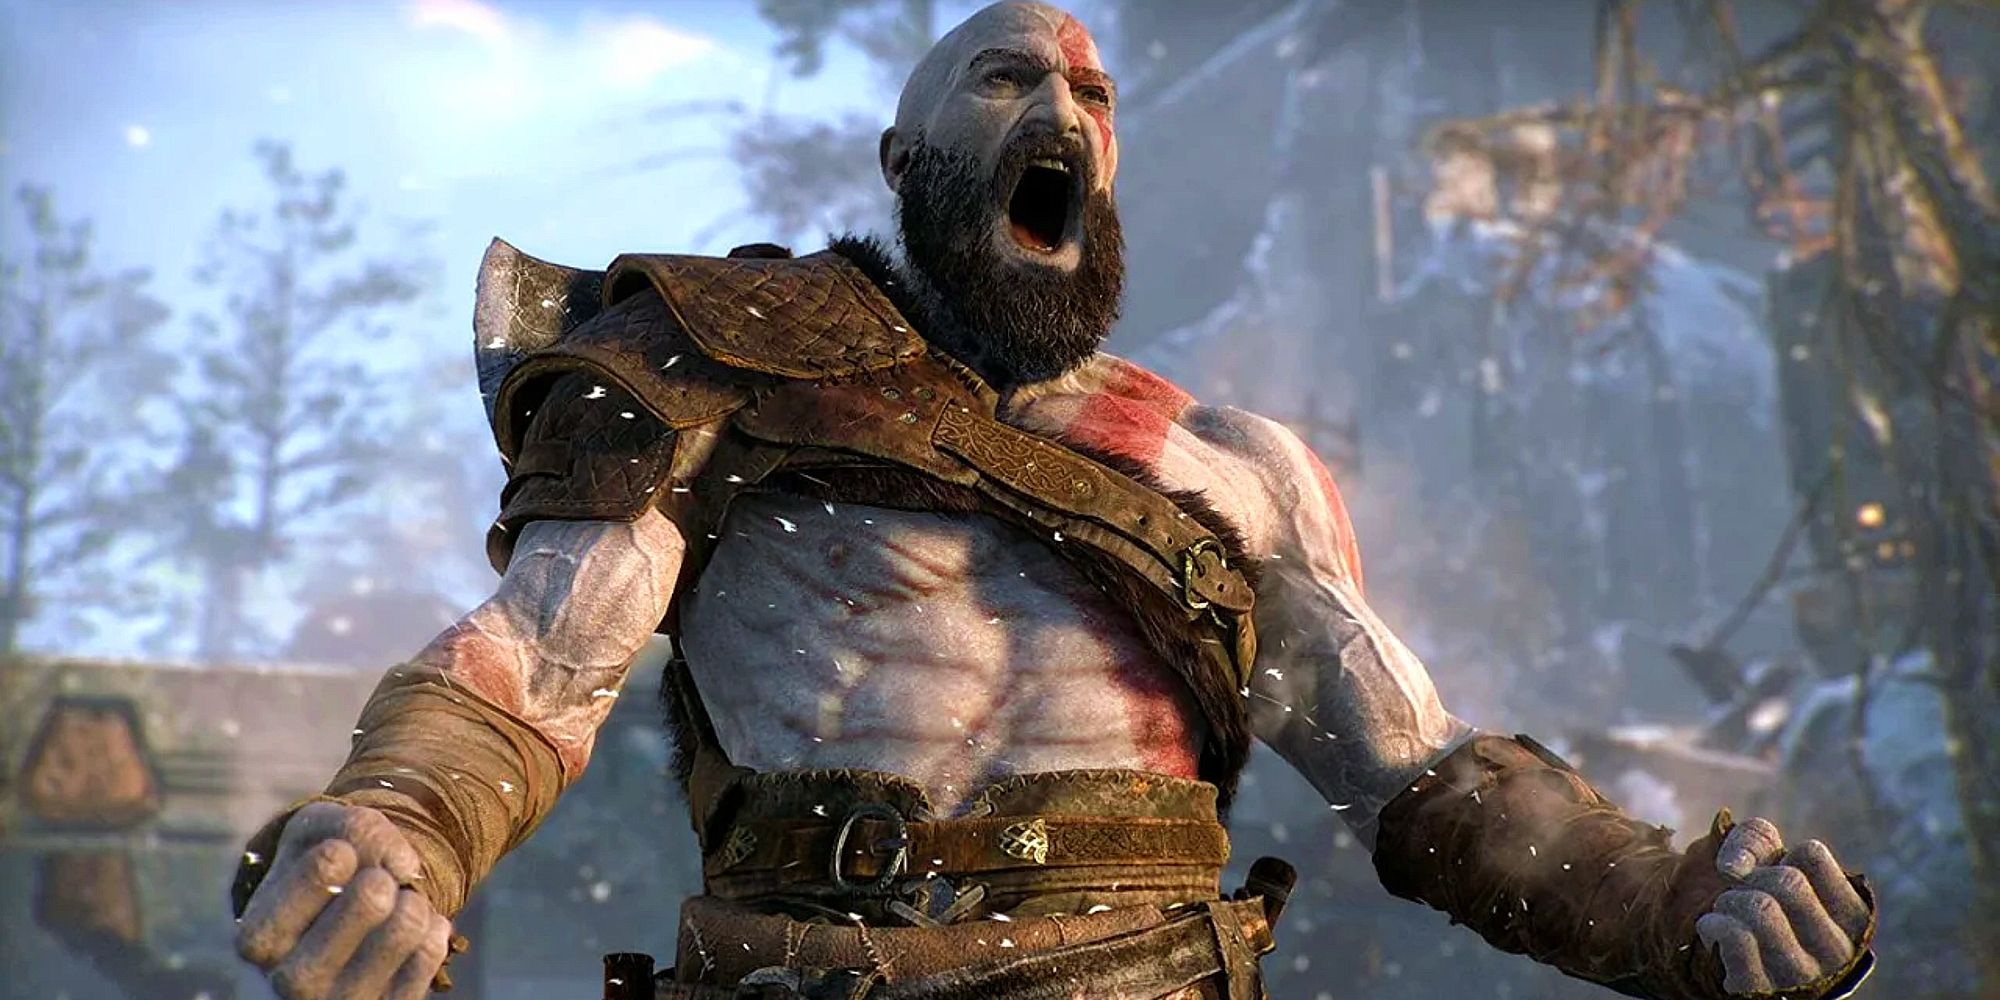 Image of Kratos unleashing his berserker rage with a fearsome shout.